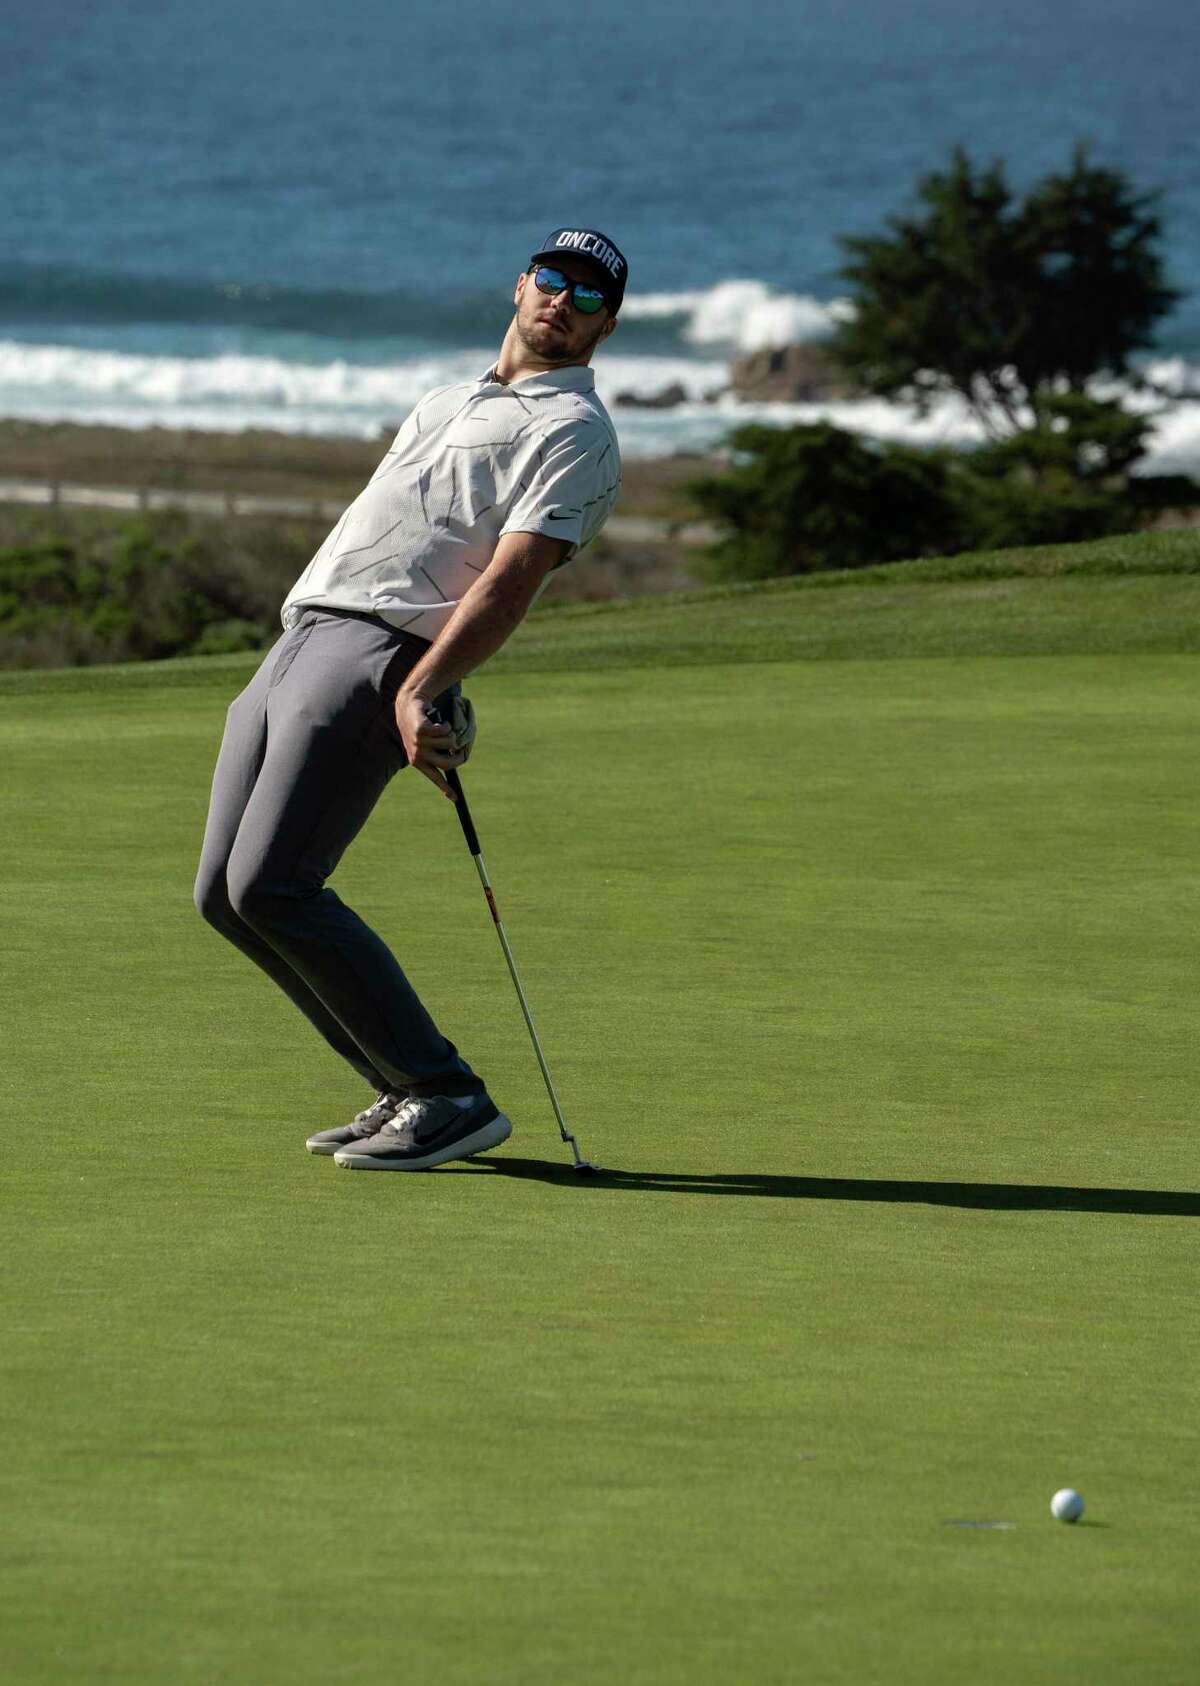 Josh Allen reacts to a putt that just misses at the 7th hole on the Monterey Peninsula Country Club golf course during the AT&T Pebble Beach Pro-Am on Thursday, Feb. 3, 2022 in Pebble Beach, Calif.